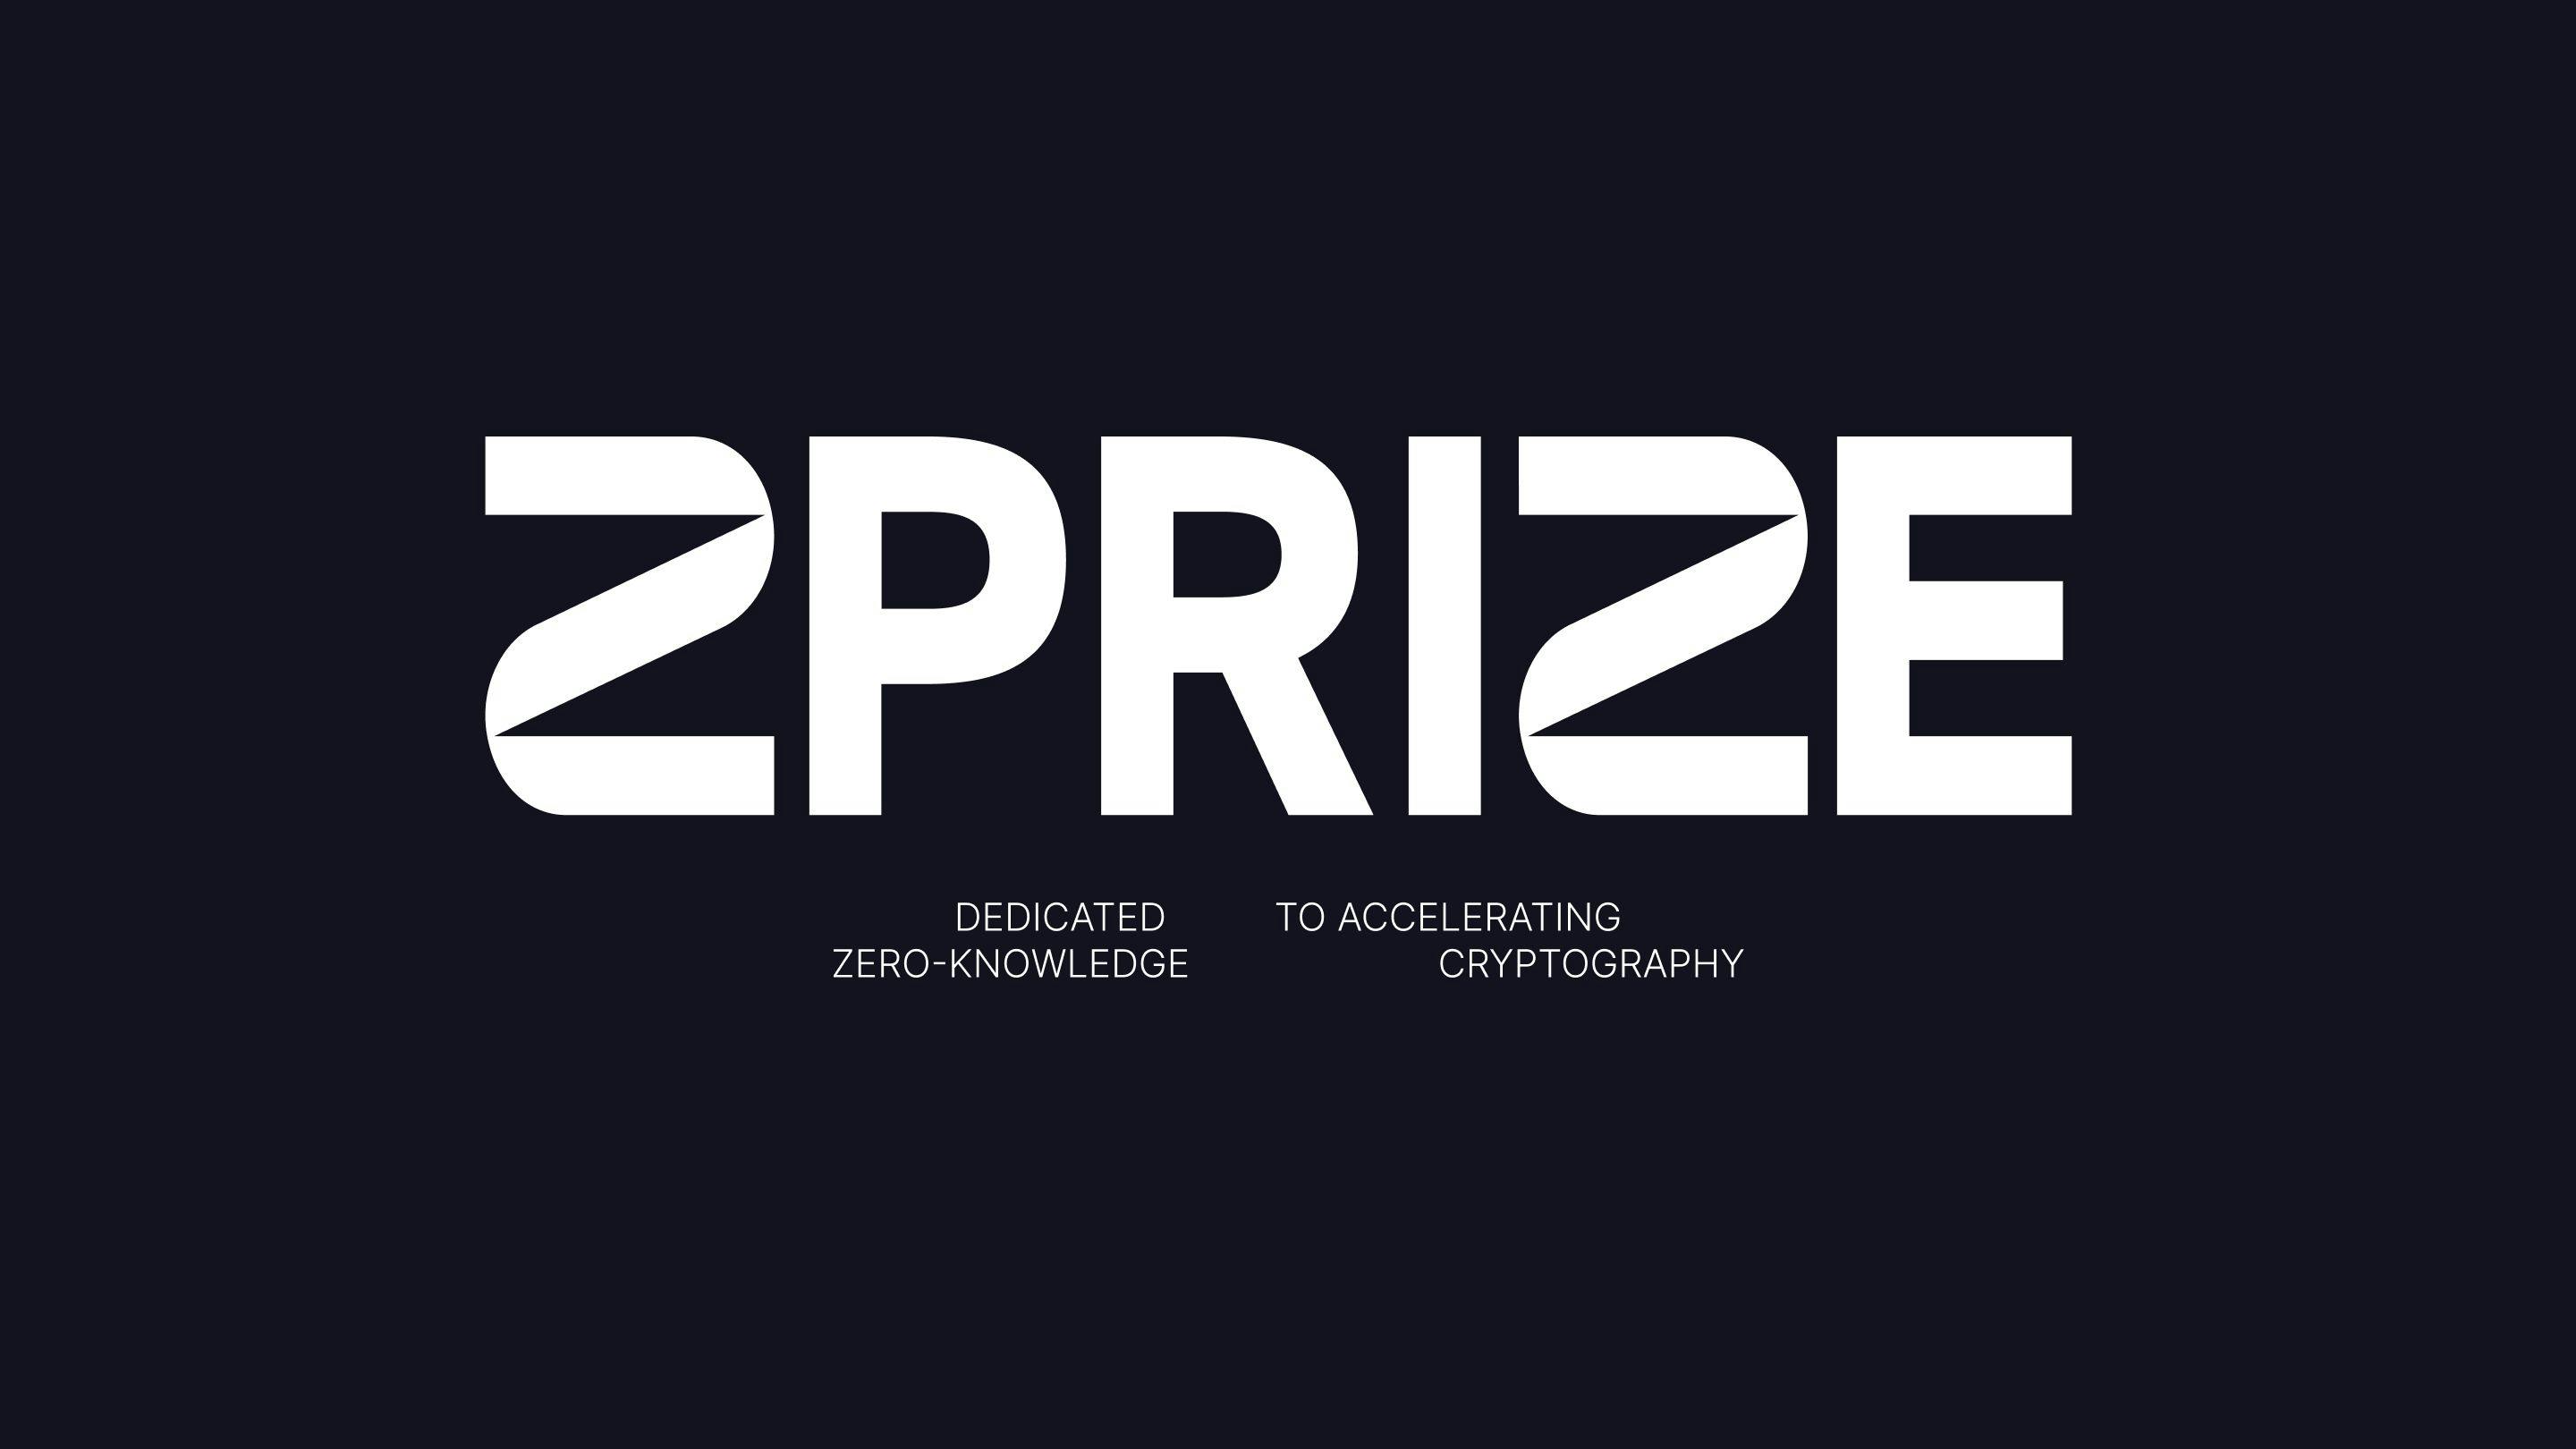 featured image - [Announcement] The ZPrize Competition For Zero Knowledge Cryptography by Aleo